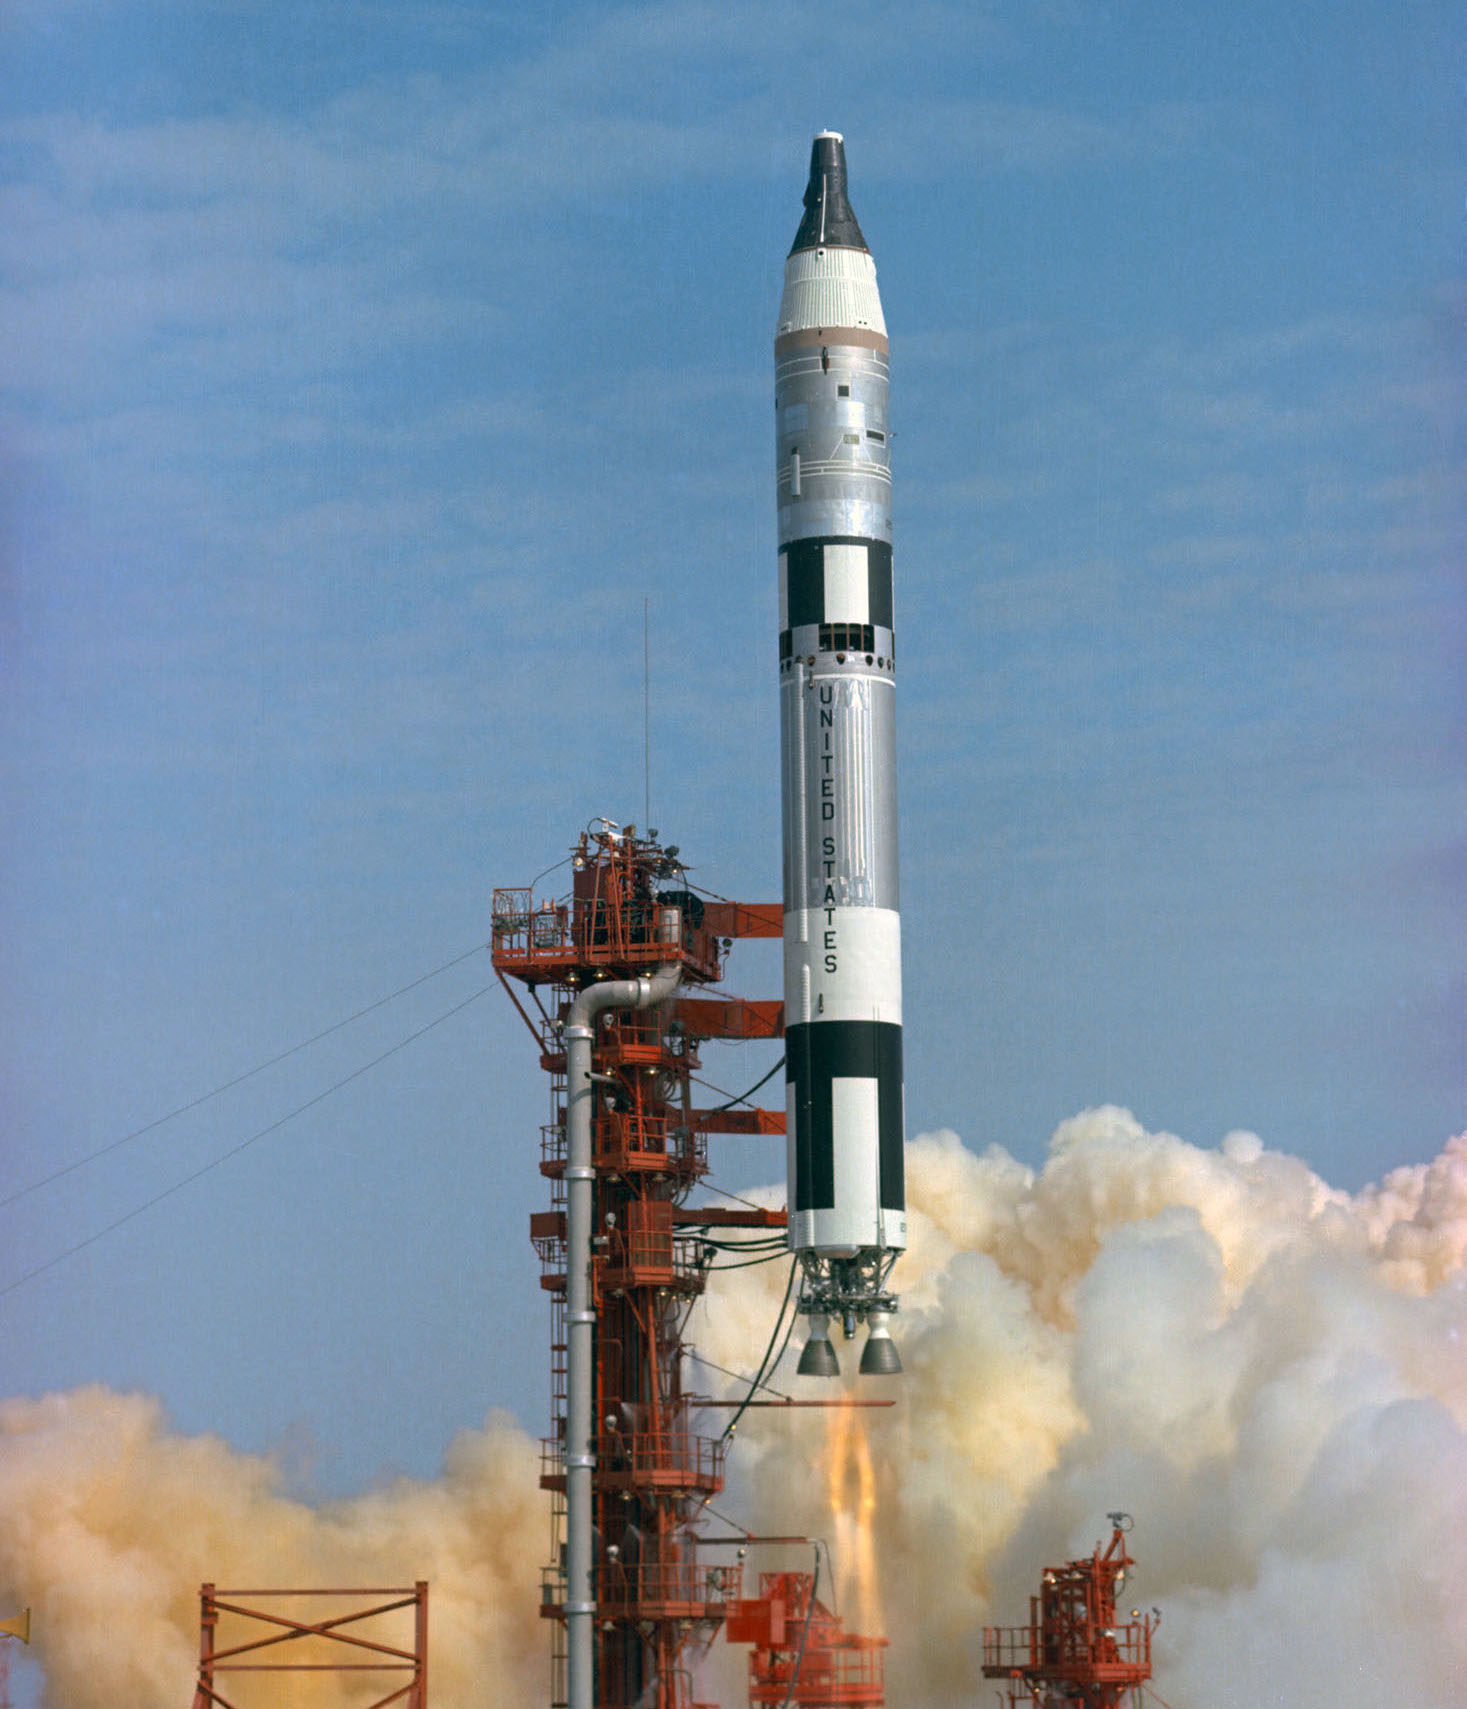 Gemini III lifts off at Launch Complex 19, Kennedy Space Center, Cape Canaveral, Florida, 14:24:00 UTC, 23 March 1965. (NASA)